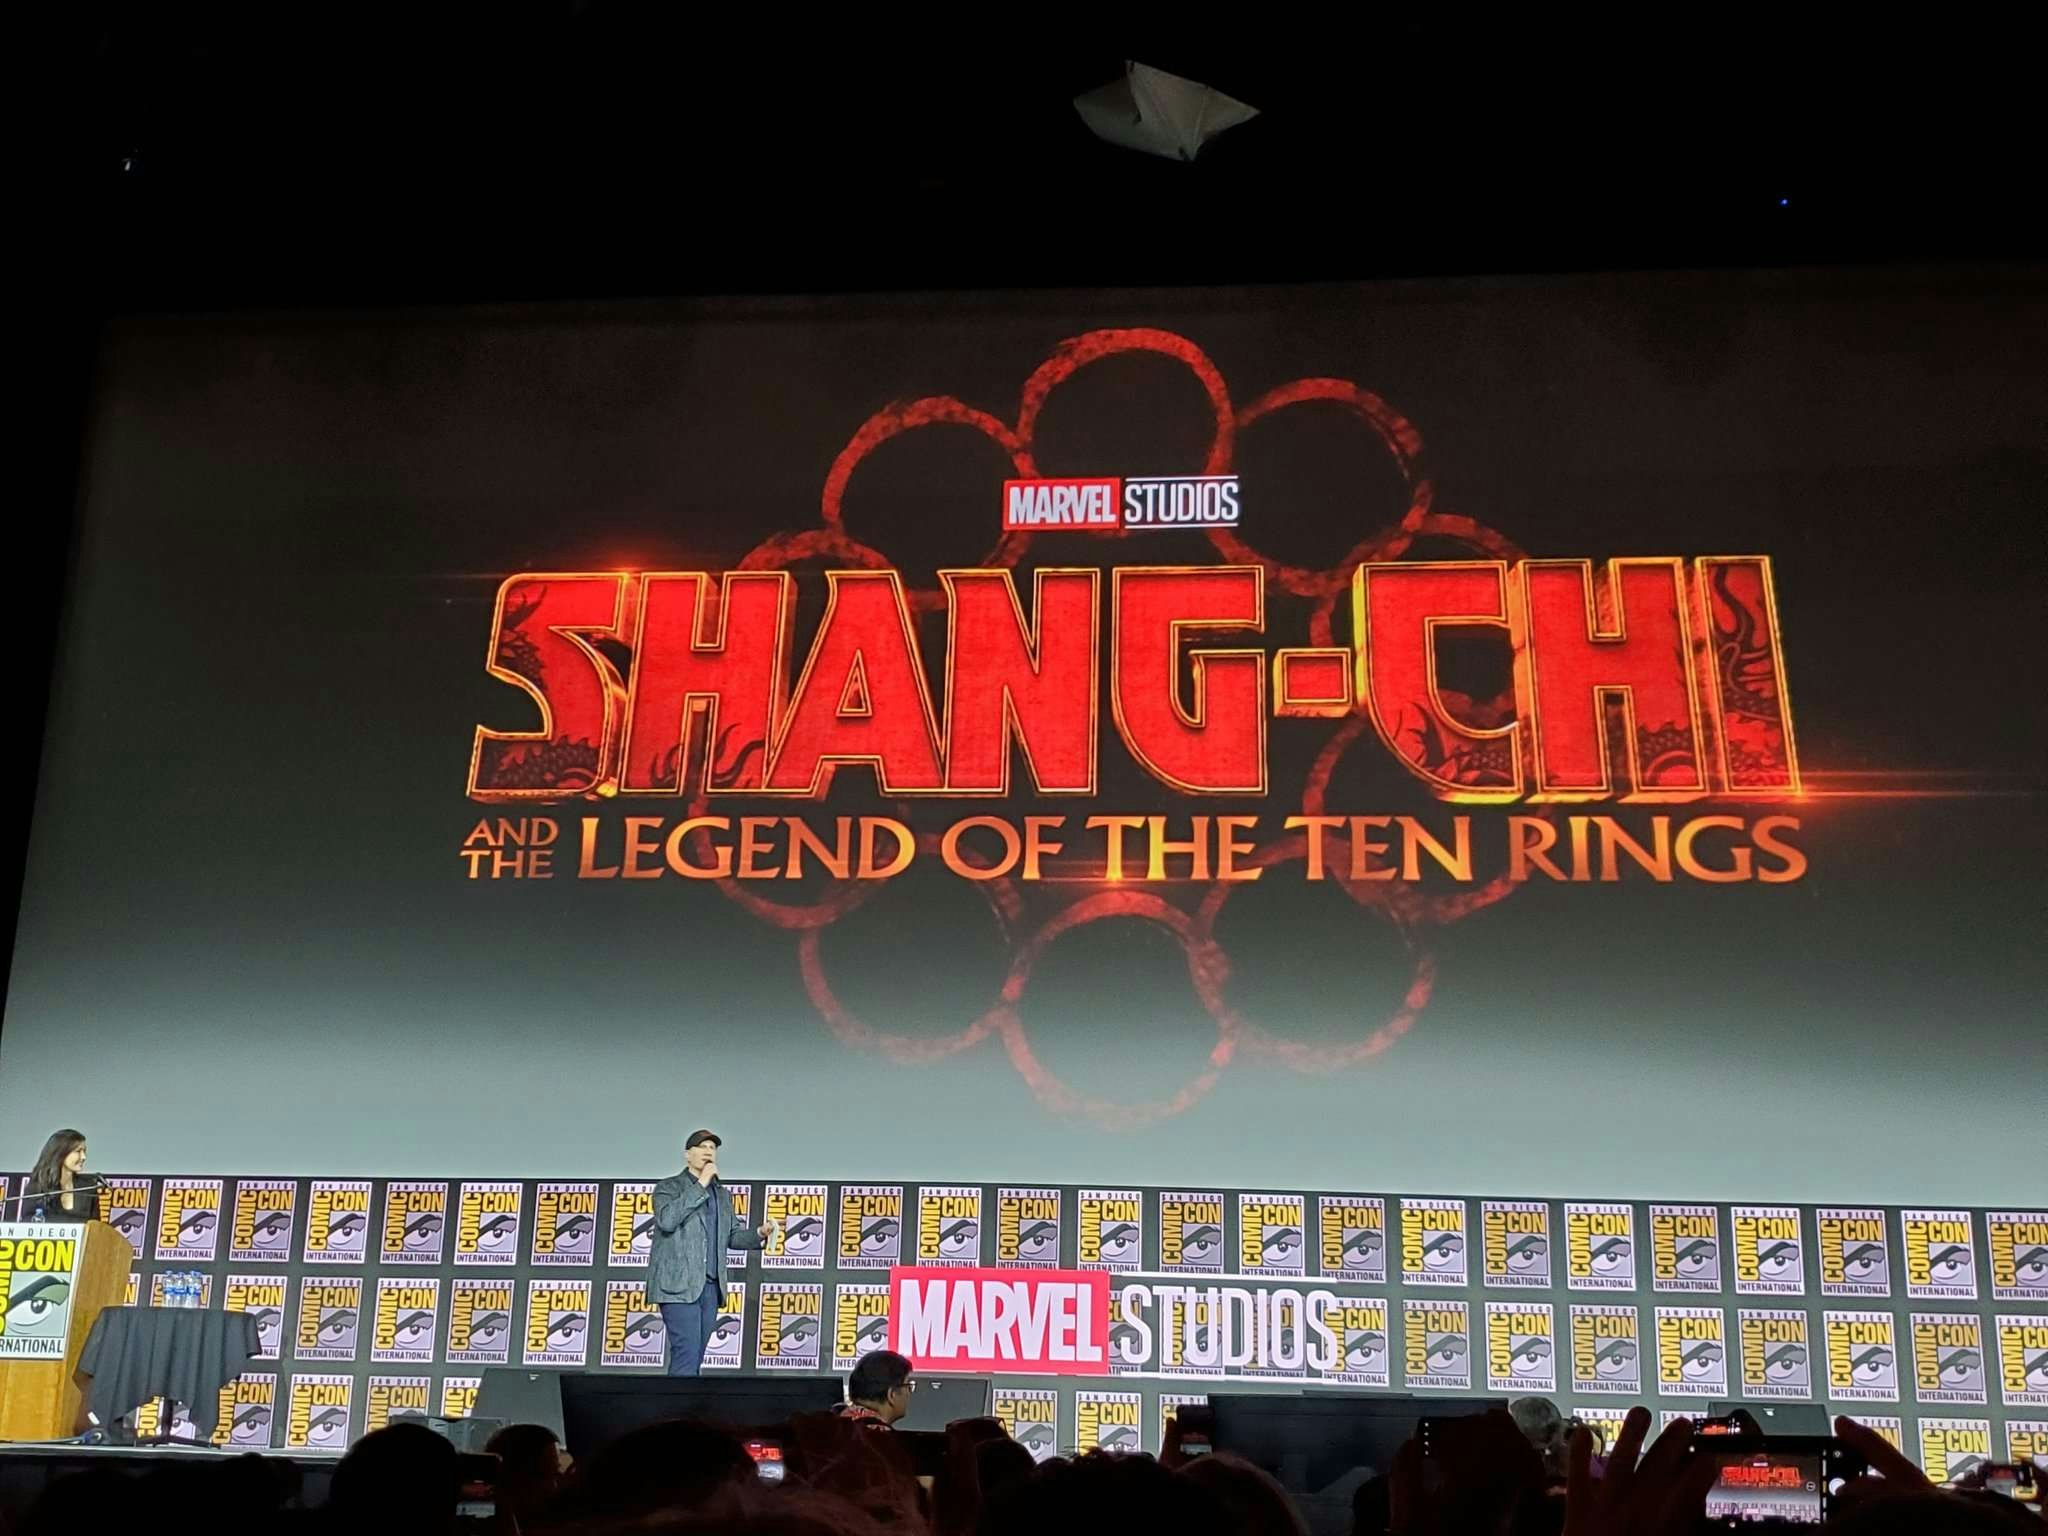 Shang-Chi movie details revealed by Marvel at Comic-Con